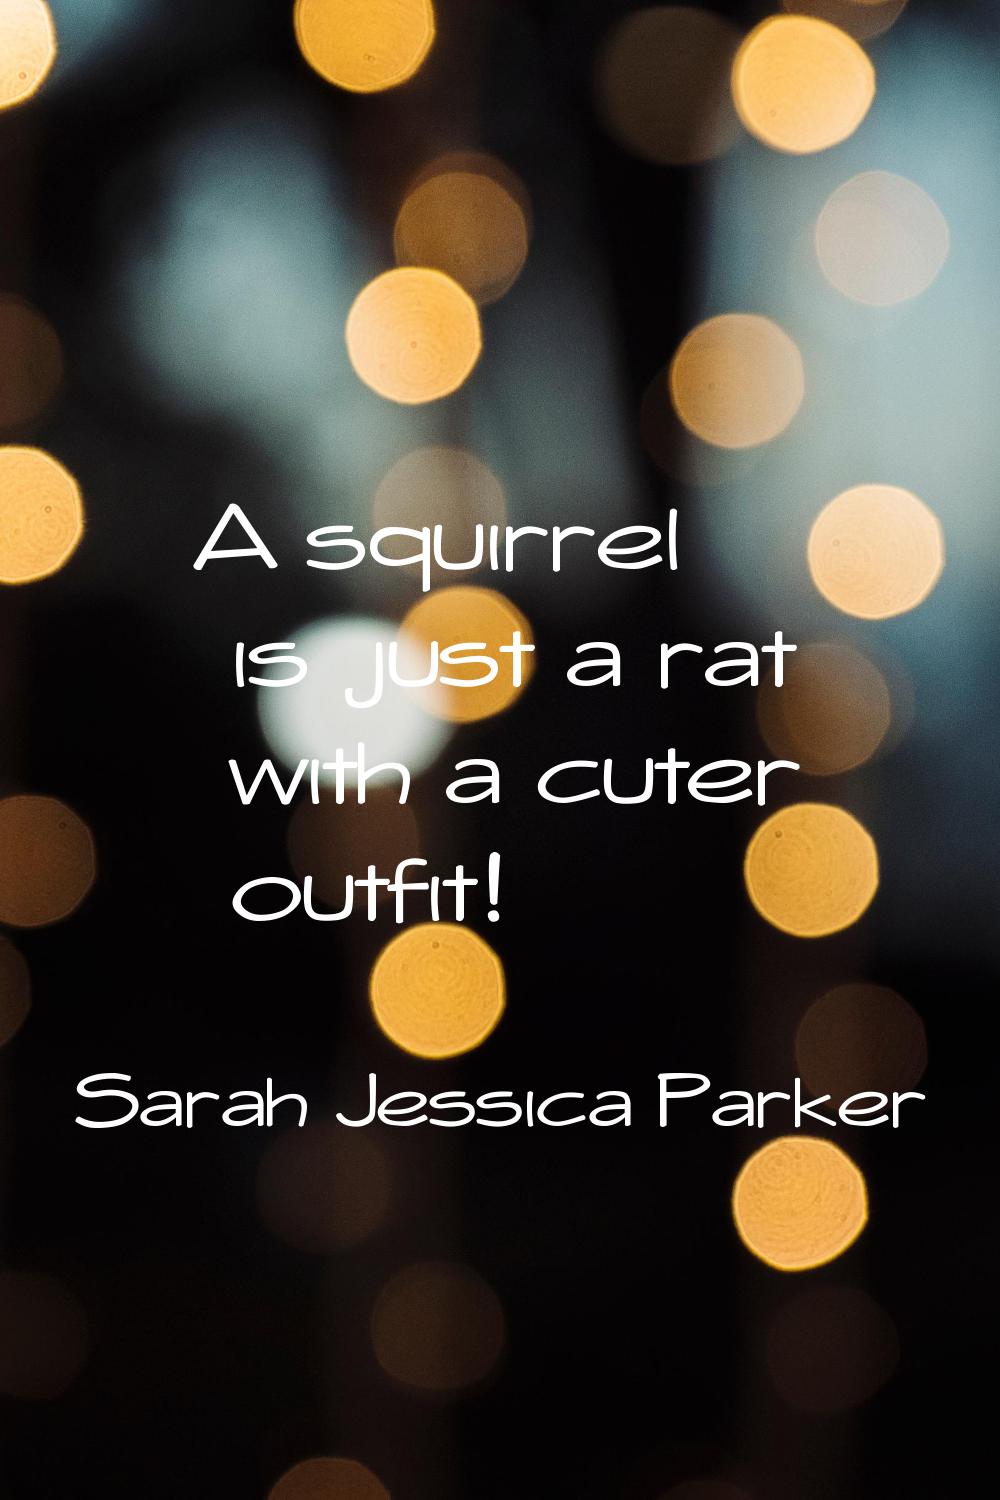 A squirrel is just a rat with a cuter outfit!